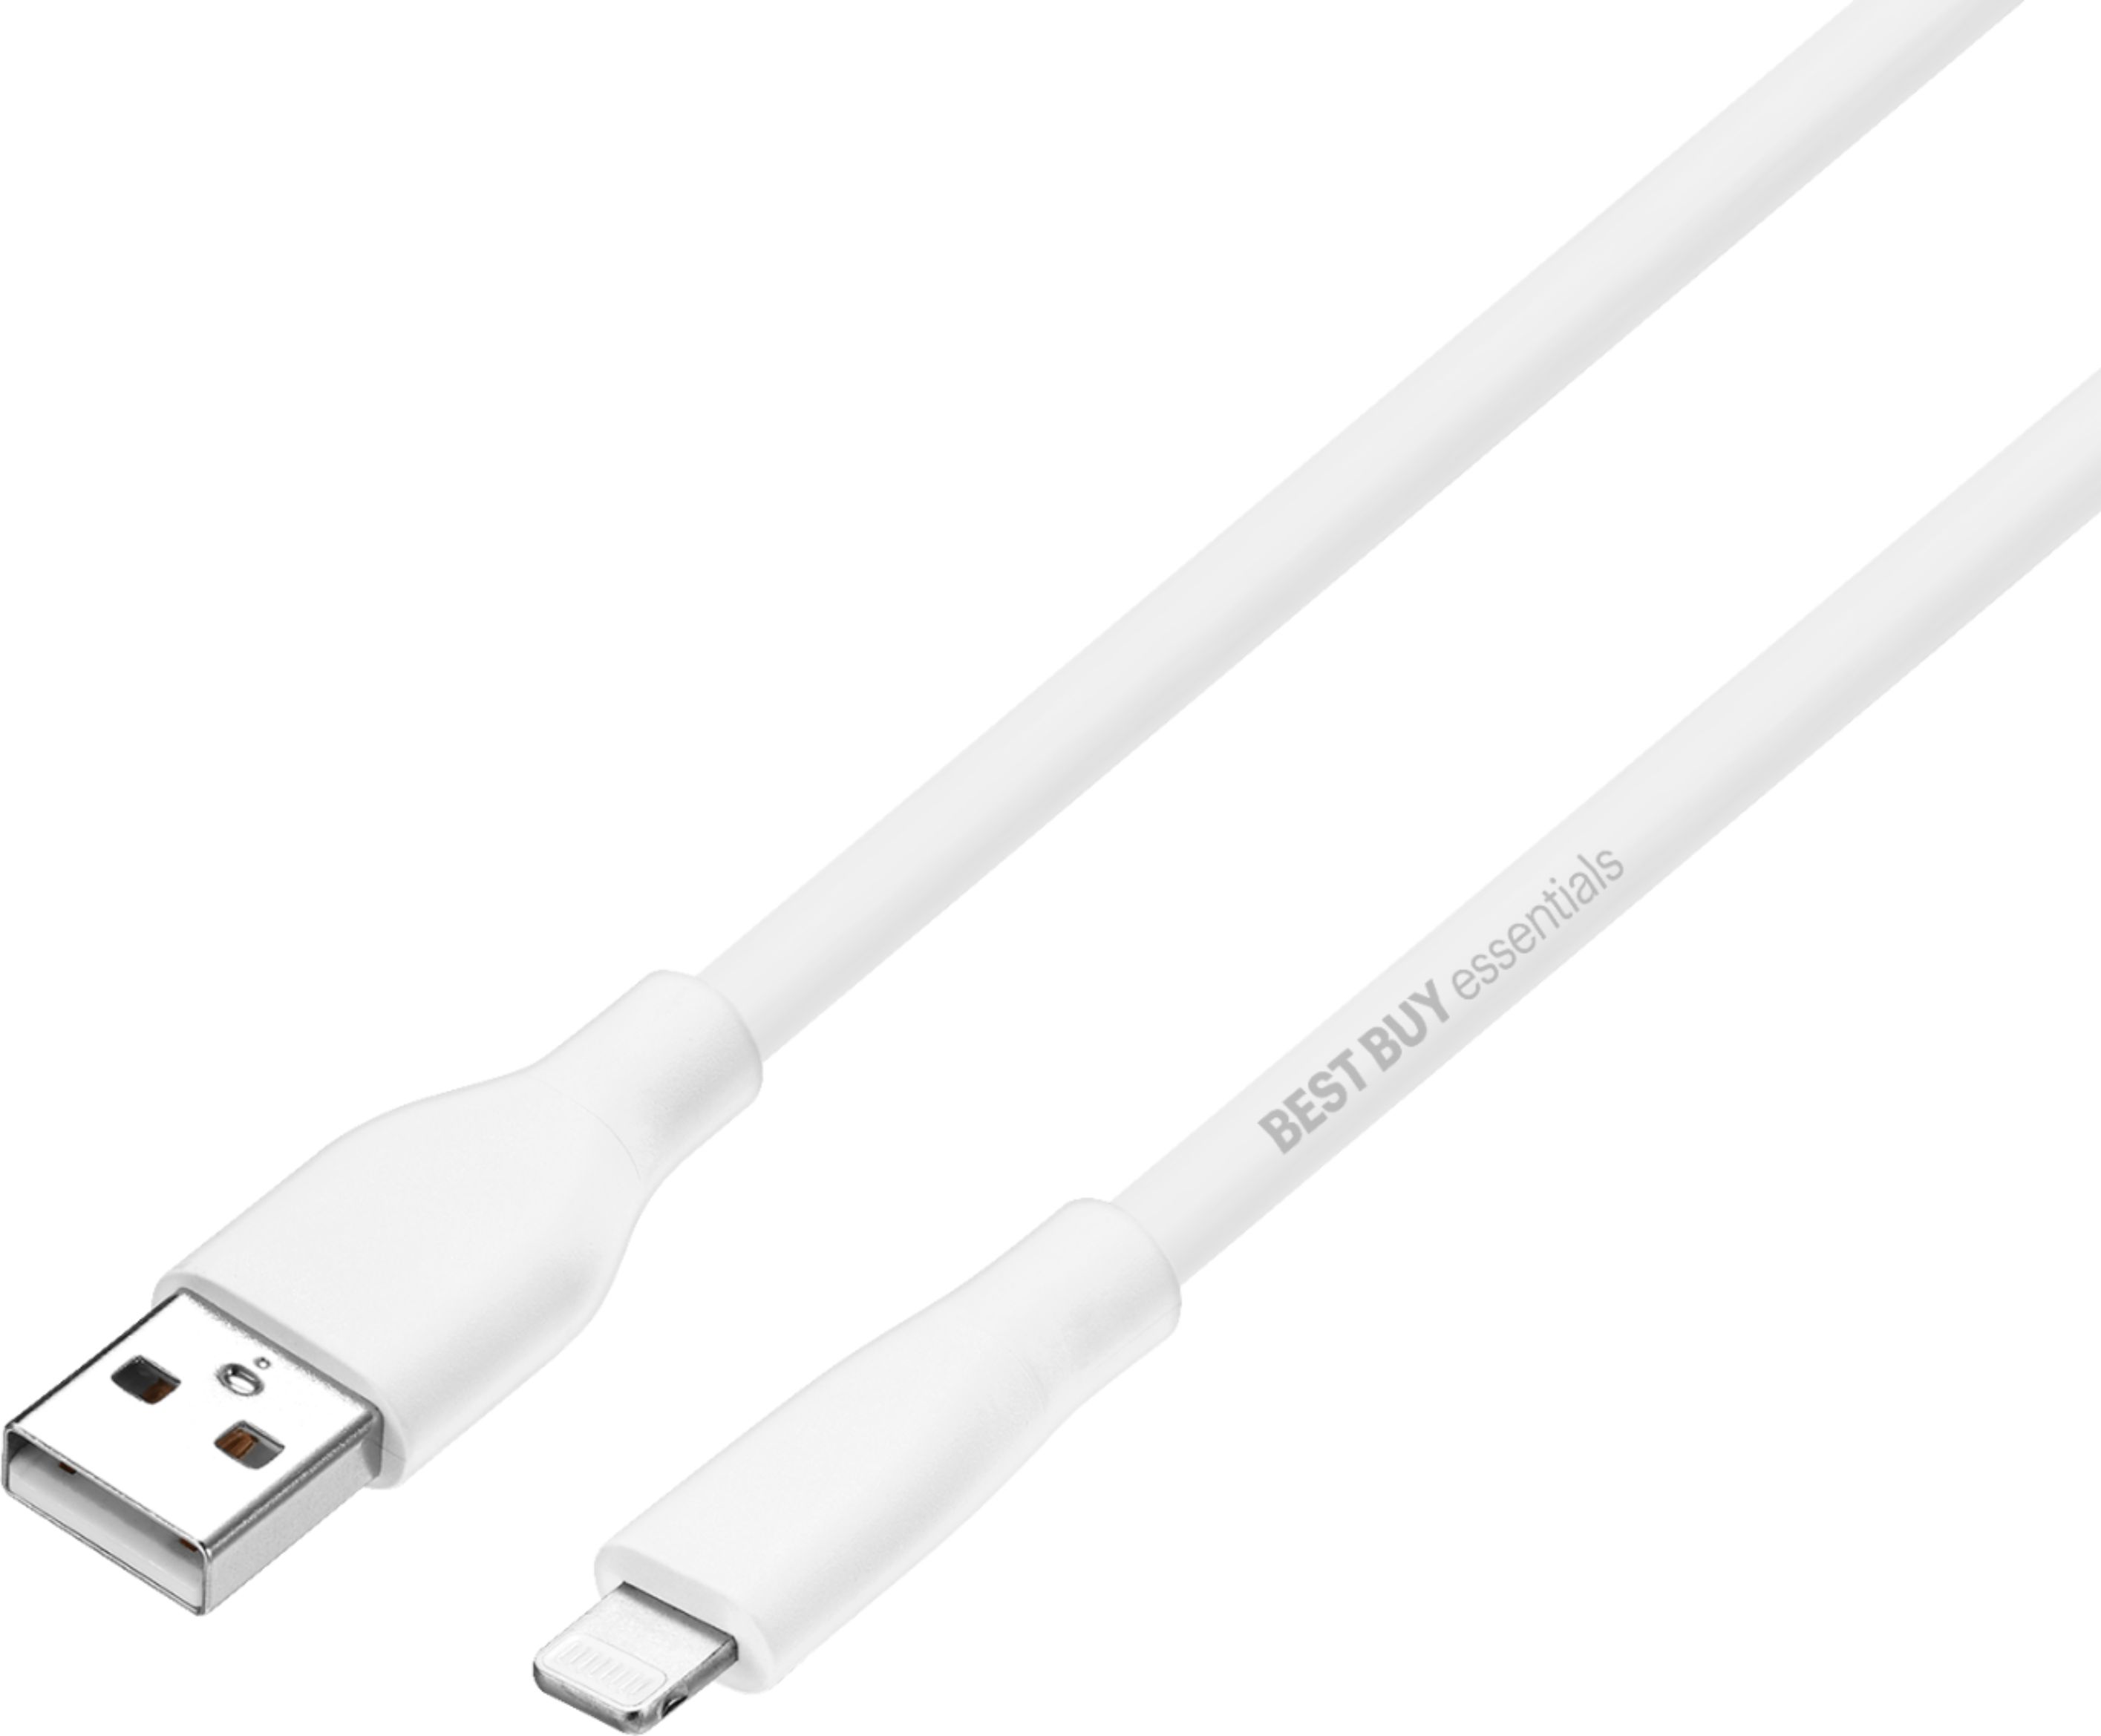 Best Buy essentials™ - 9' Lightning to USB Charge-and-Sync Cable - White